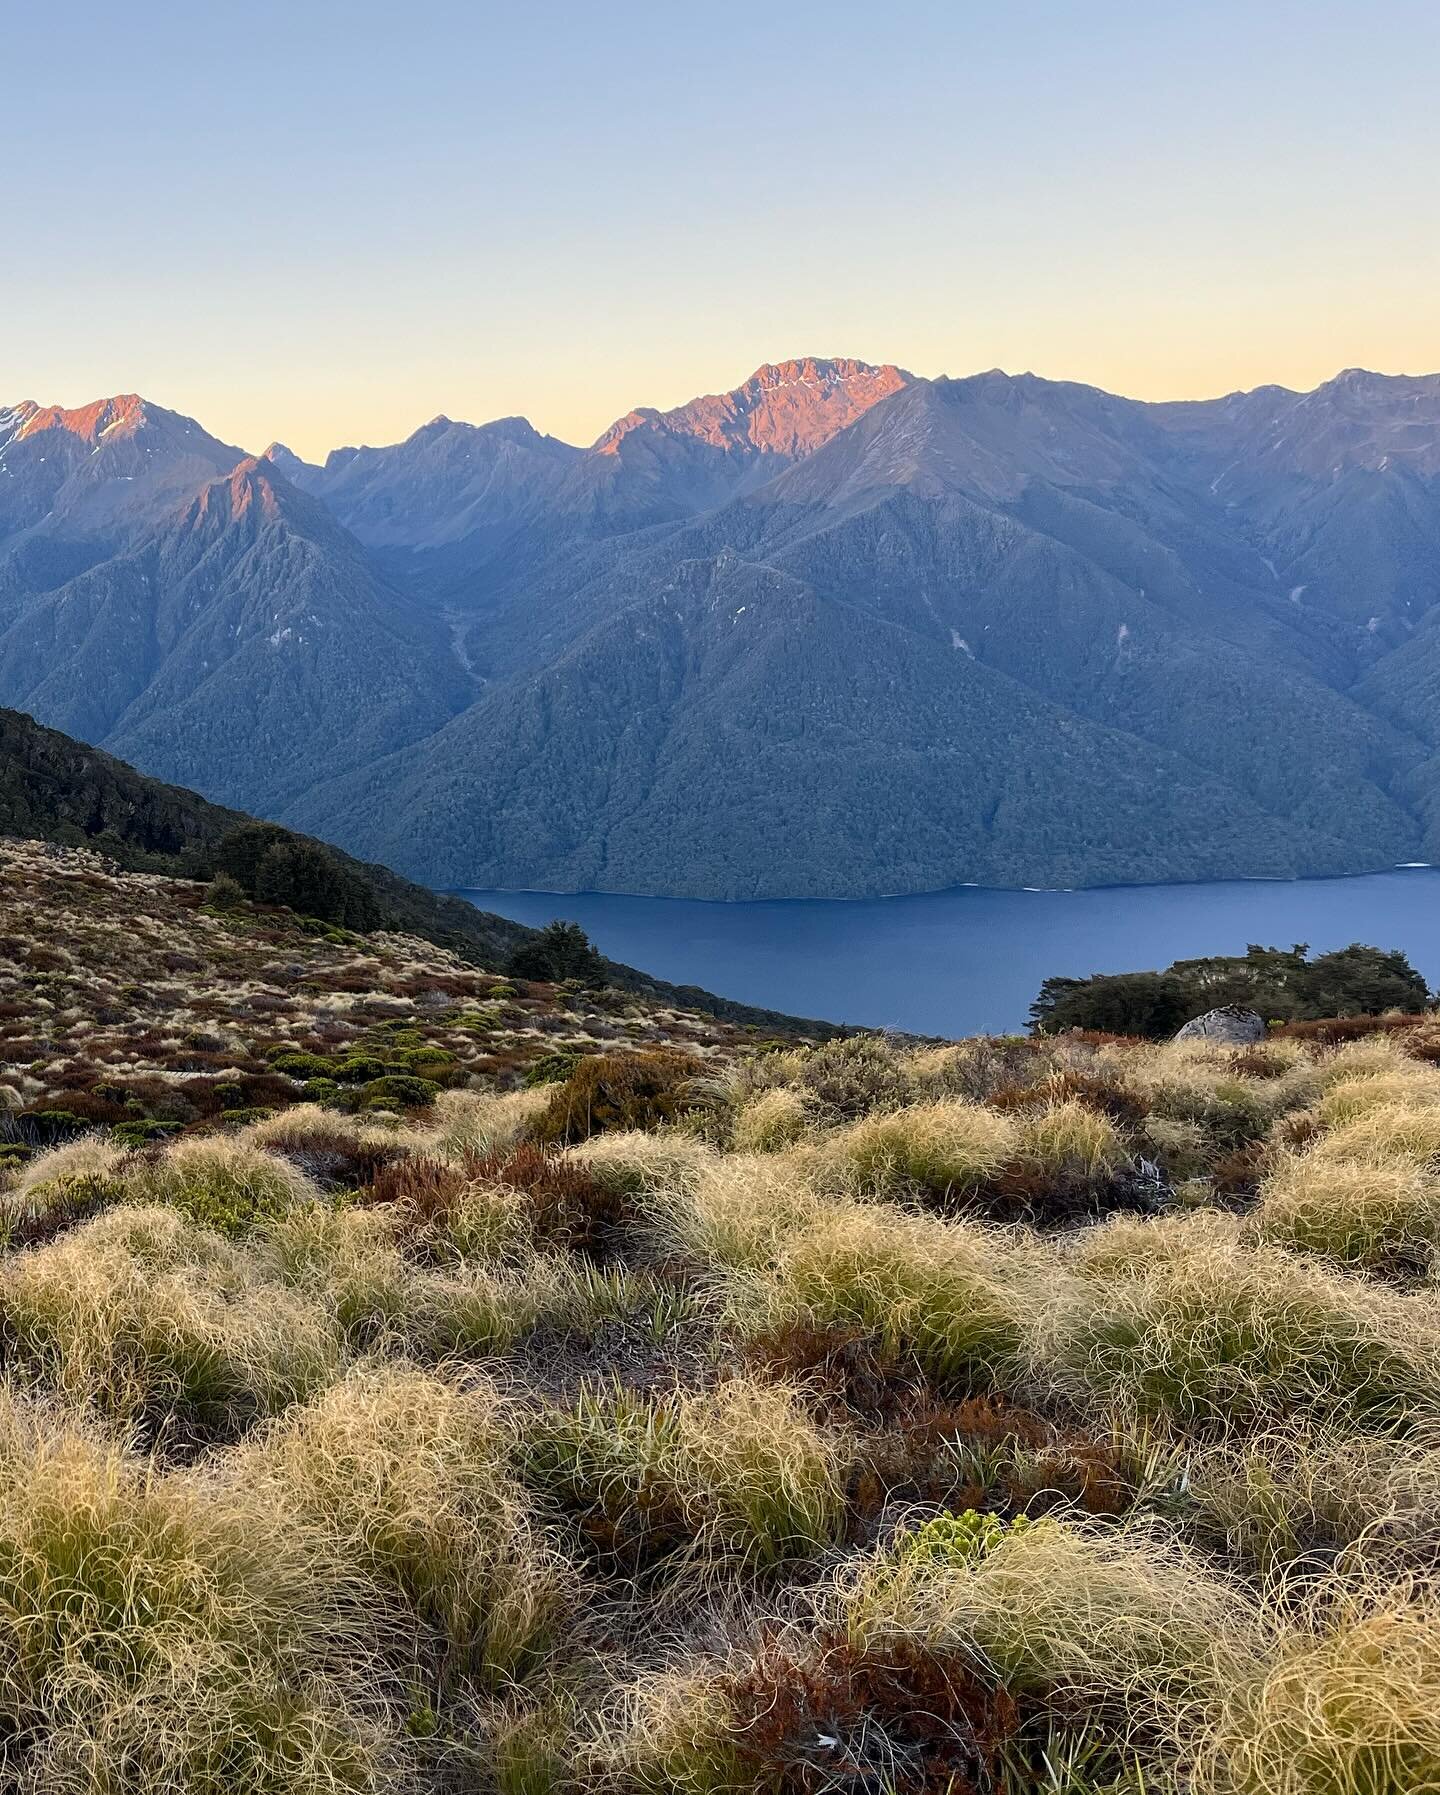 3 days on the Kepler track. Spoiled by ridge views and bird sightings.

1 - sunrise from Luxmore Hut
2 - Lake Te Anau 
3 - classic ridge walking with views down Iris Burn valley 
4 - kea, the only alpine parrot. They are super intelligent and also lo